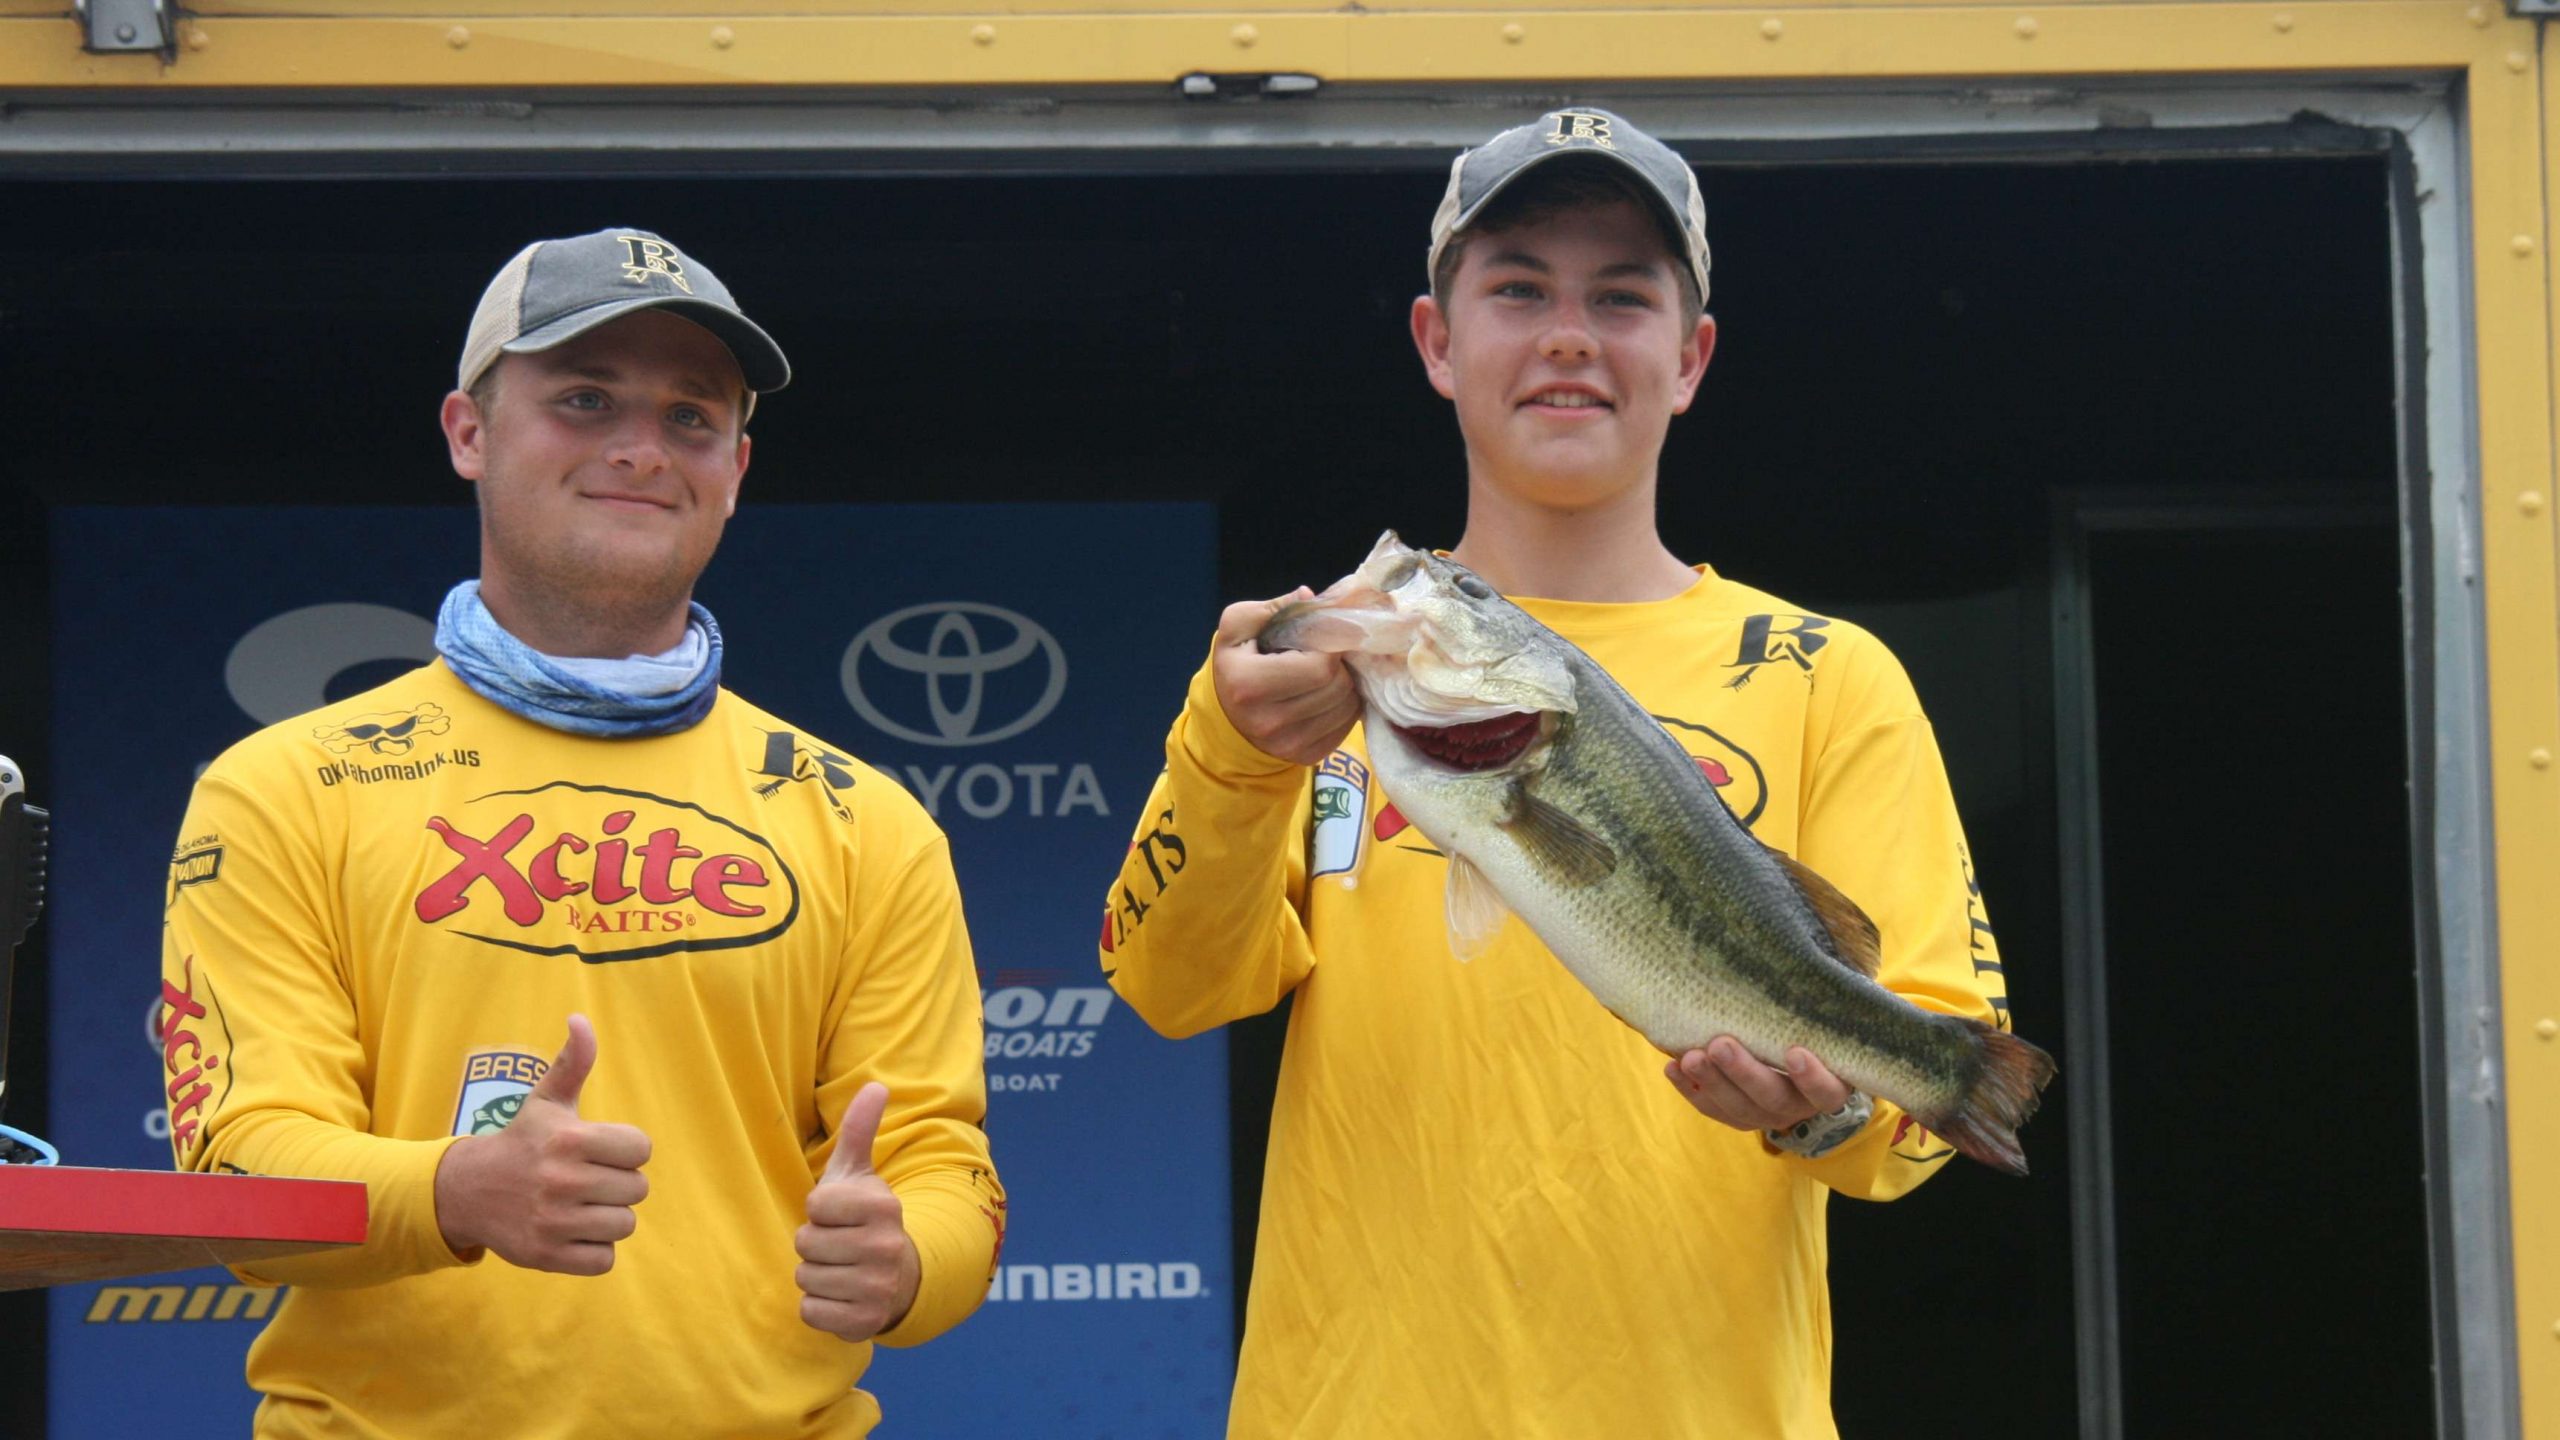 Eric Noyes, left, gives the thumbs up in approval of teammate Mason Mitchell's hefty bass. The team from Broken Arrow, Okla. finished 28th overall, and that was the only fish they caught.